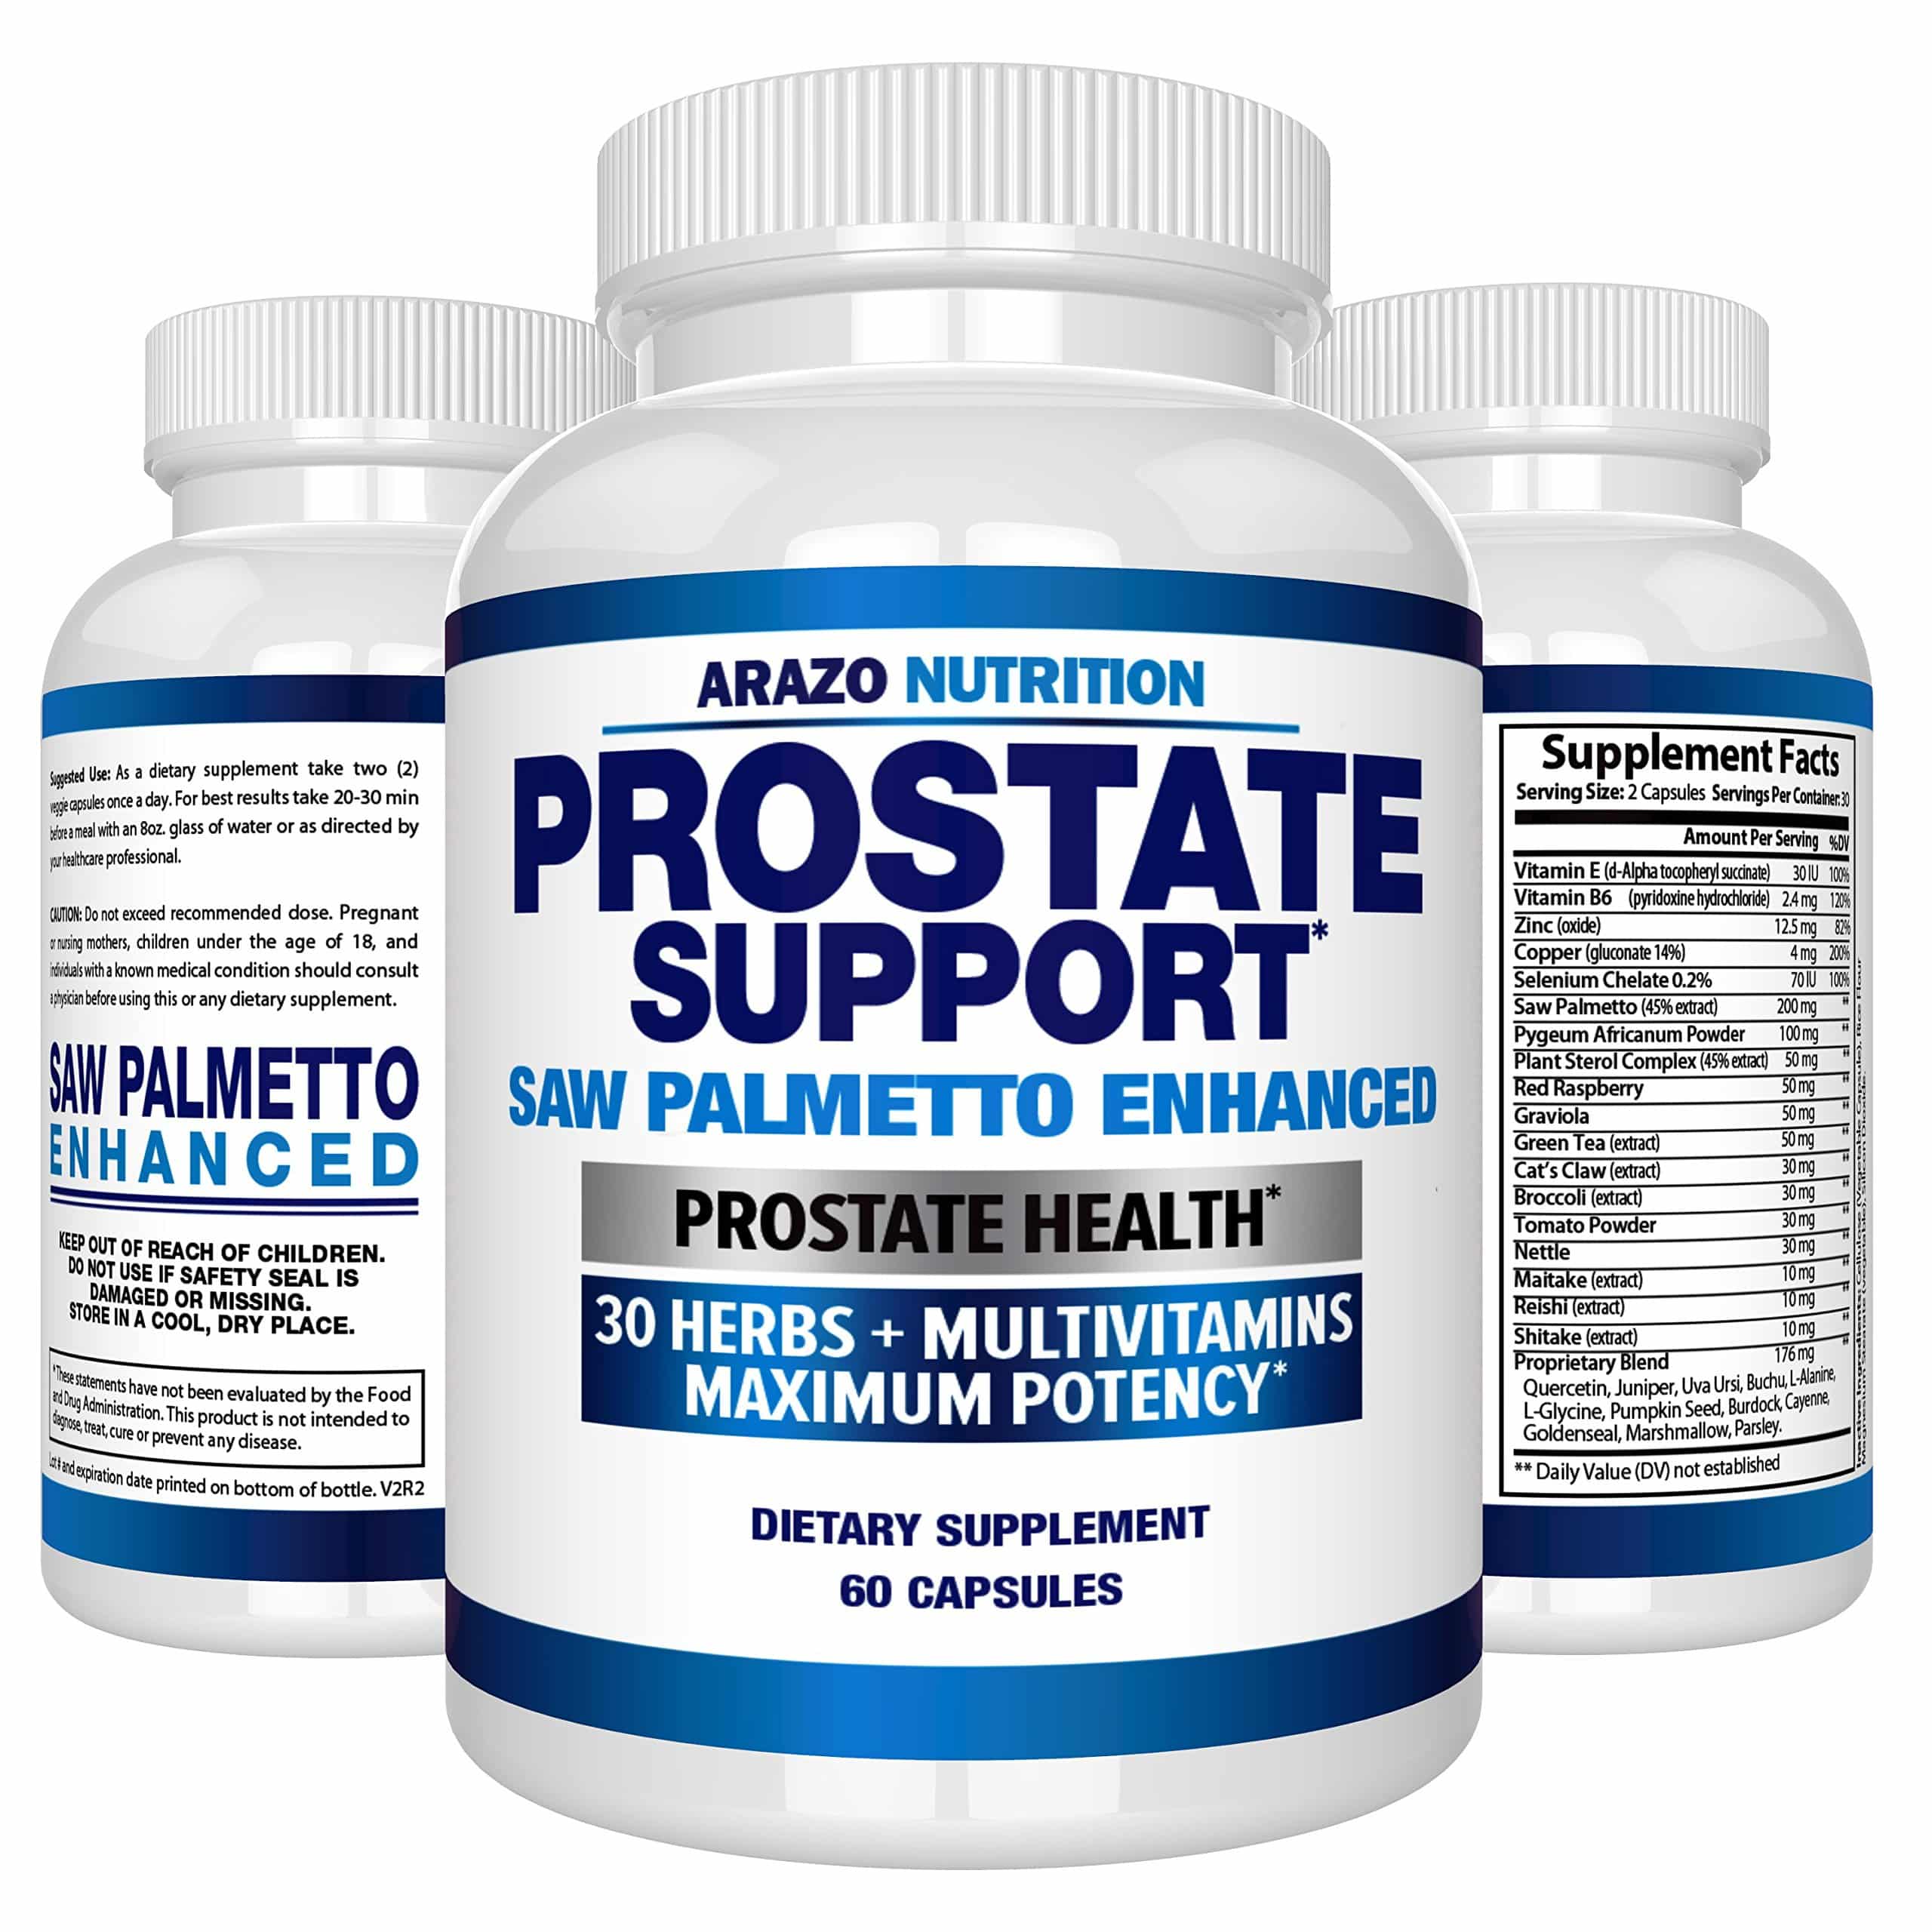 Amazon.com: TOP RATED Prostate Supplement